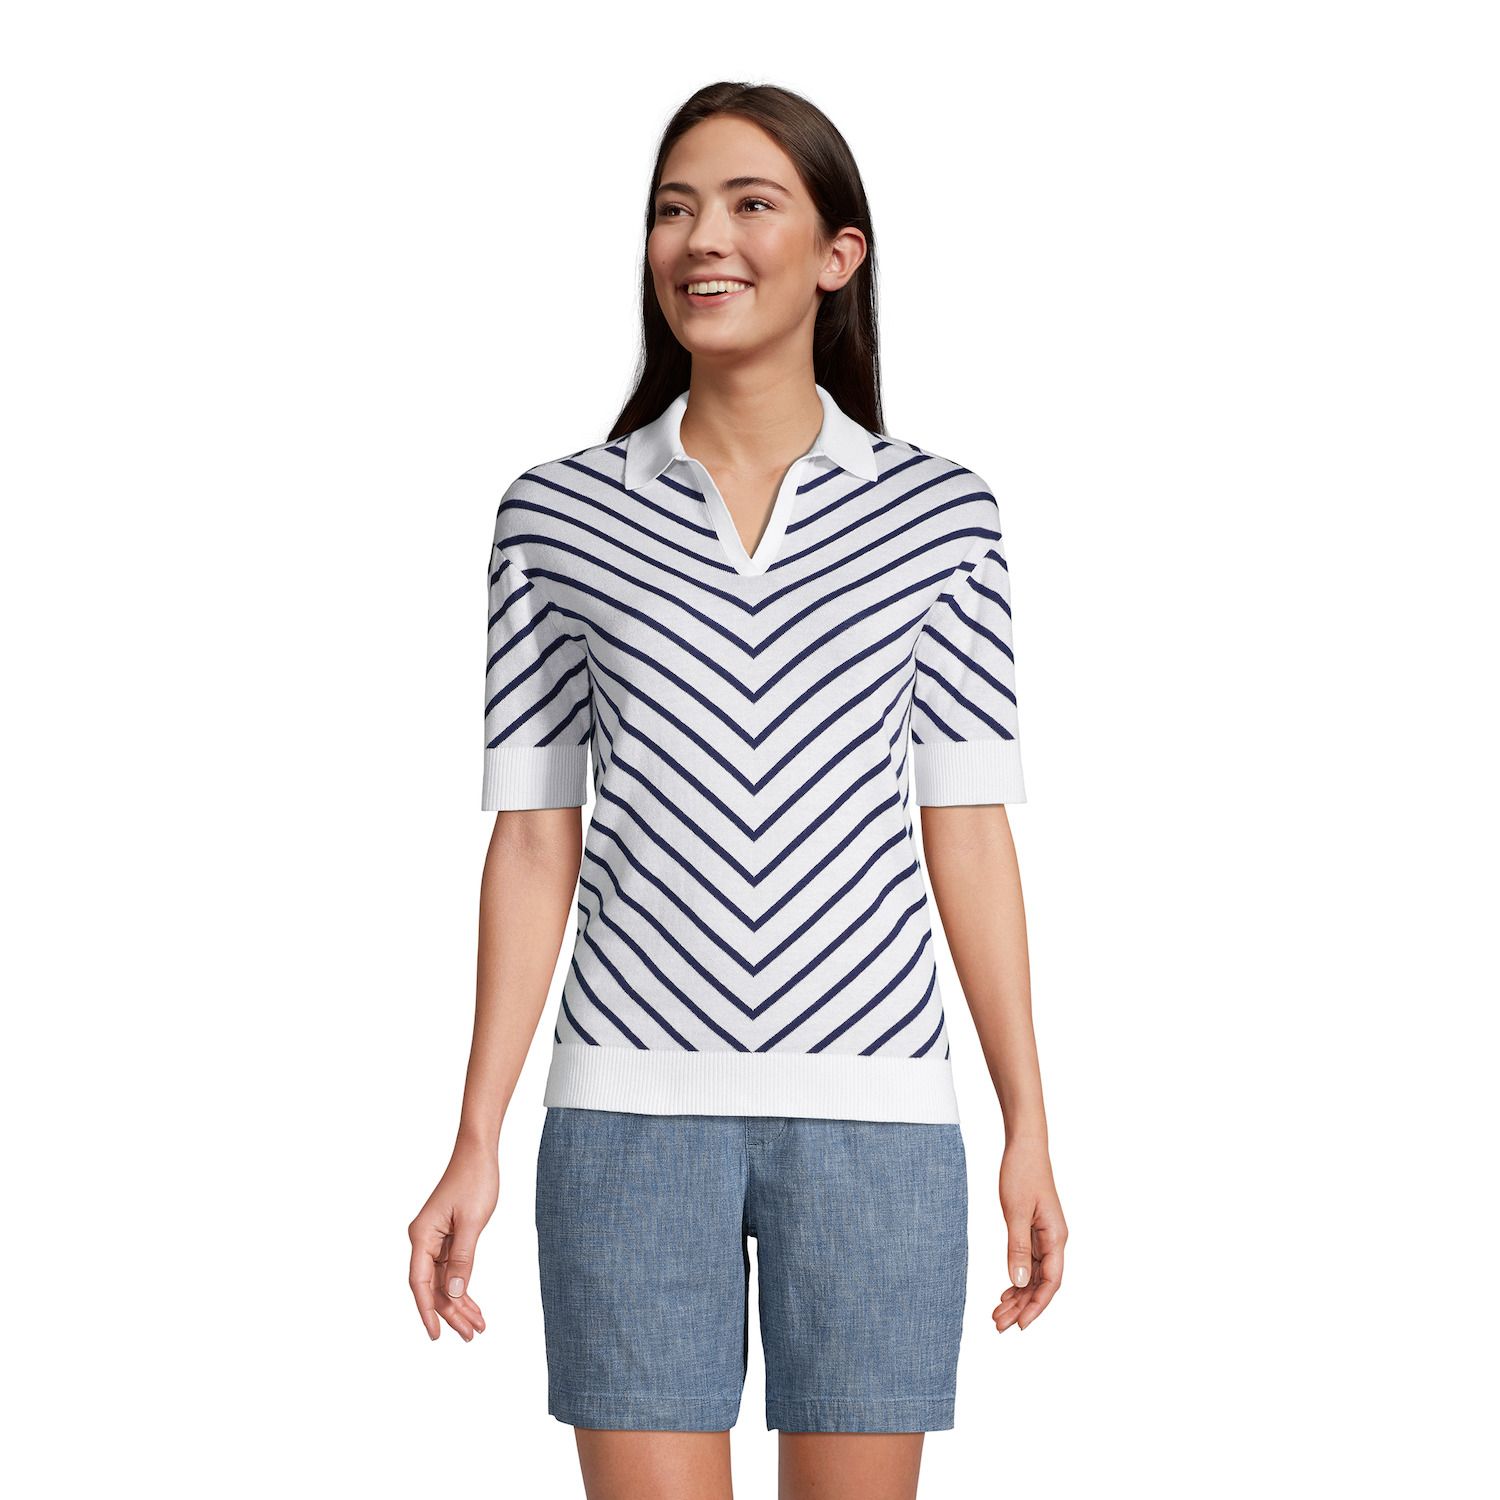 Image for Lands' End Women's Short-Sleeve Polo Sweater at Kohl's.